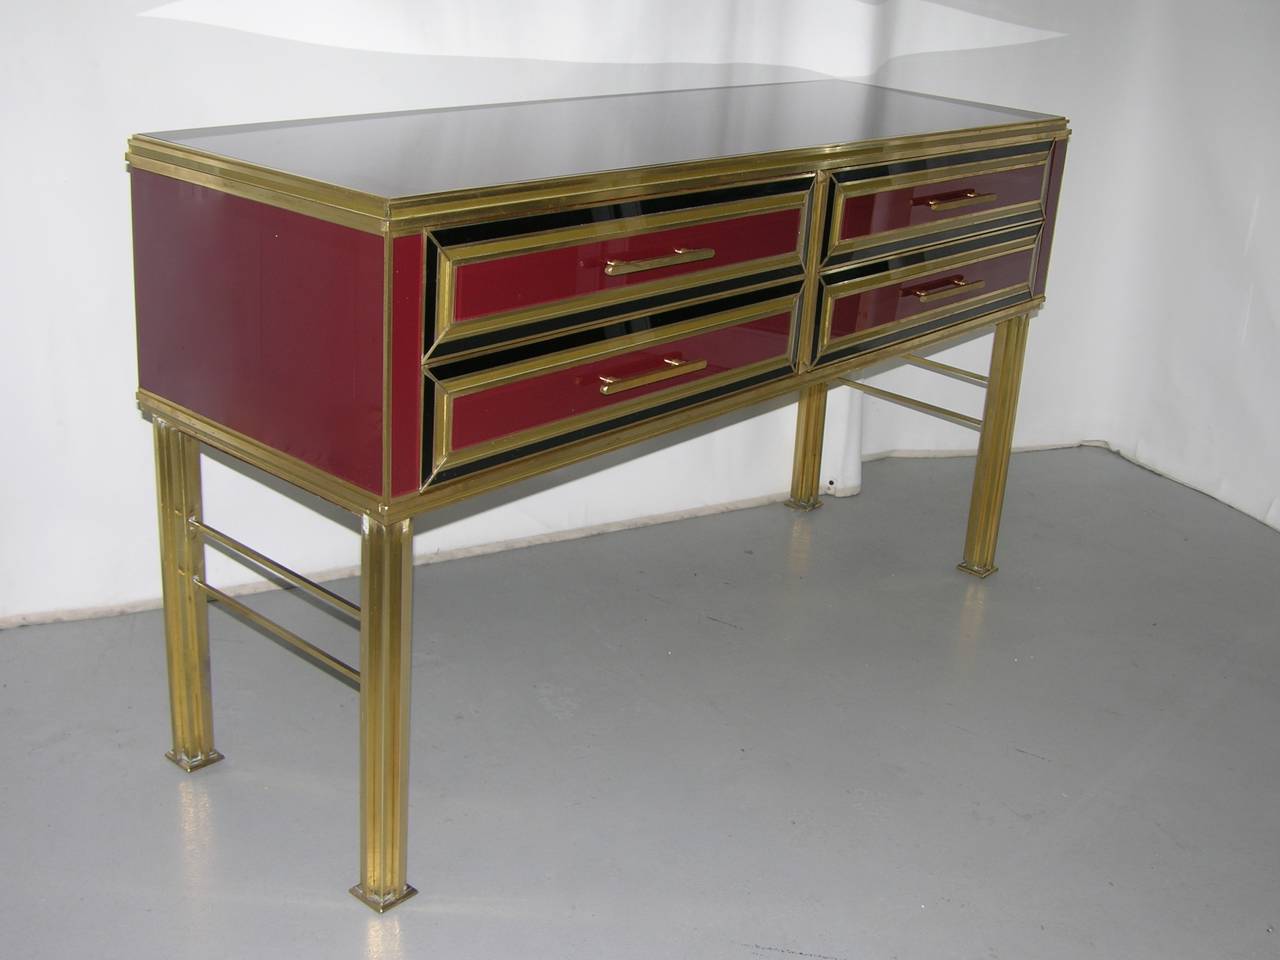 Late 1970s refined one of a kind Italian chest or console with four drawers of superb design, entirely hand manufactured, the wood structure covered in glass with a rare wine color, raised on exceptionally handcrafted stepped bronze legs with